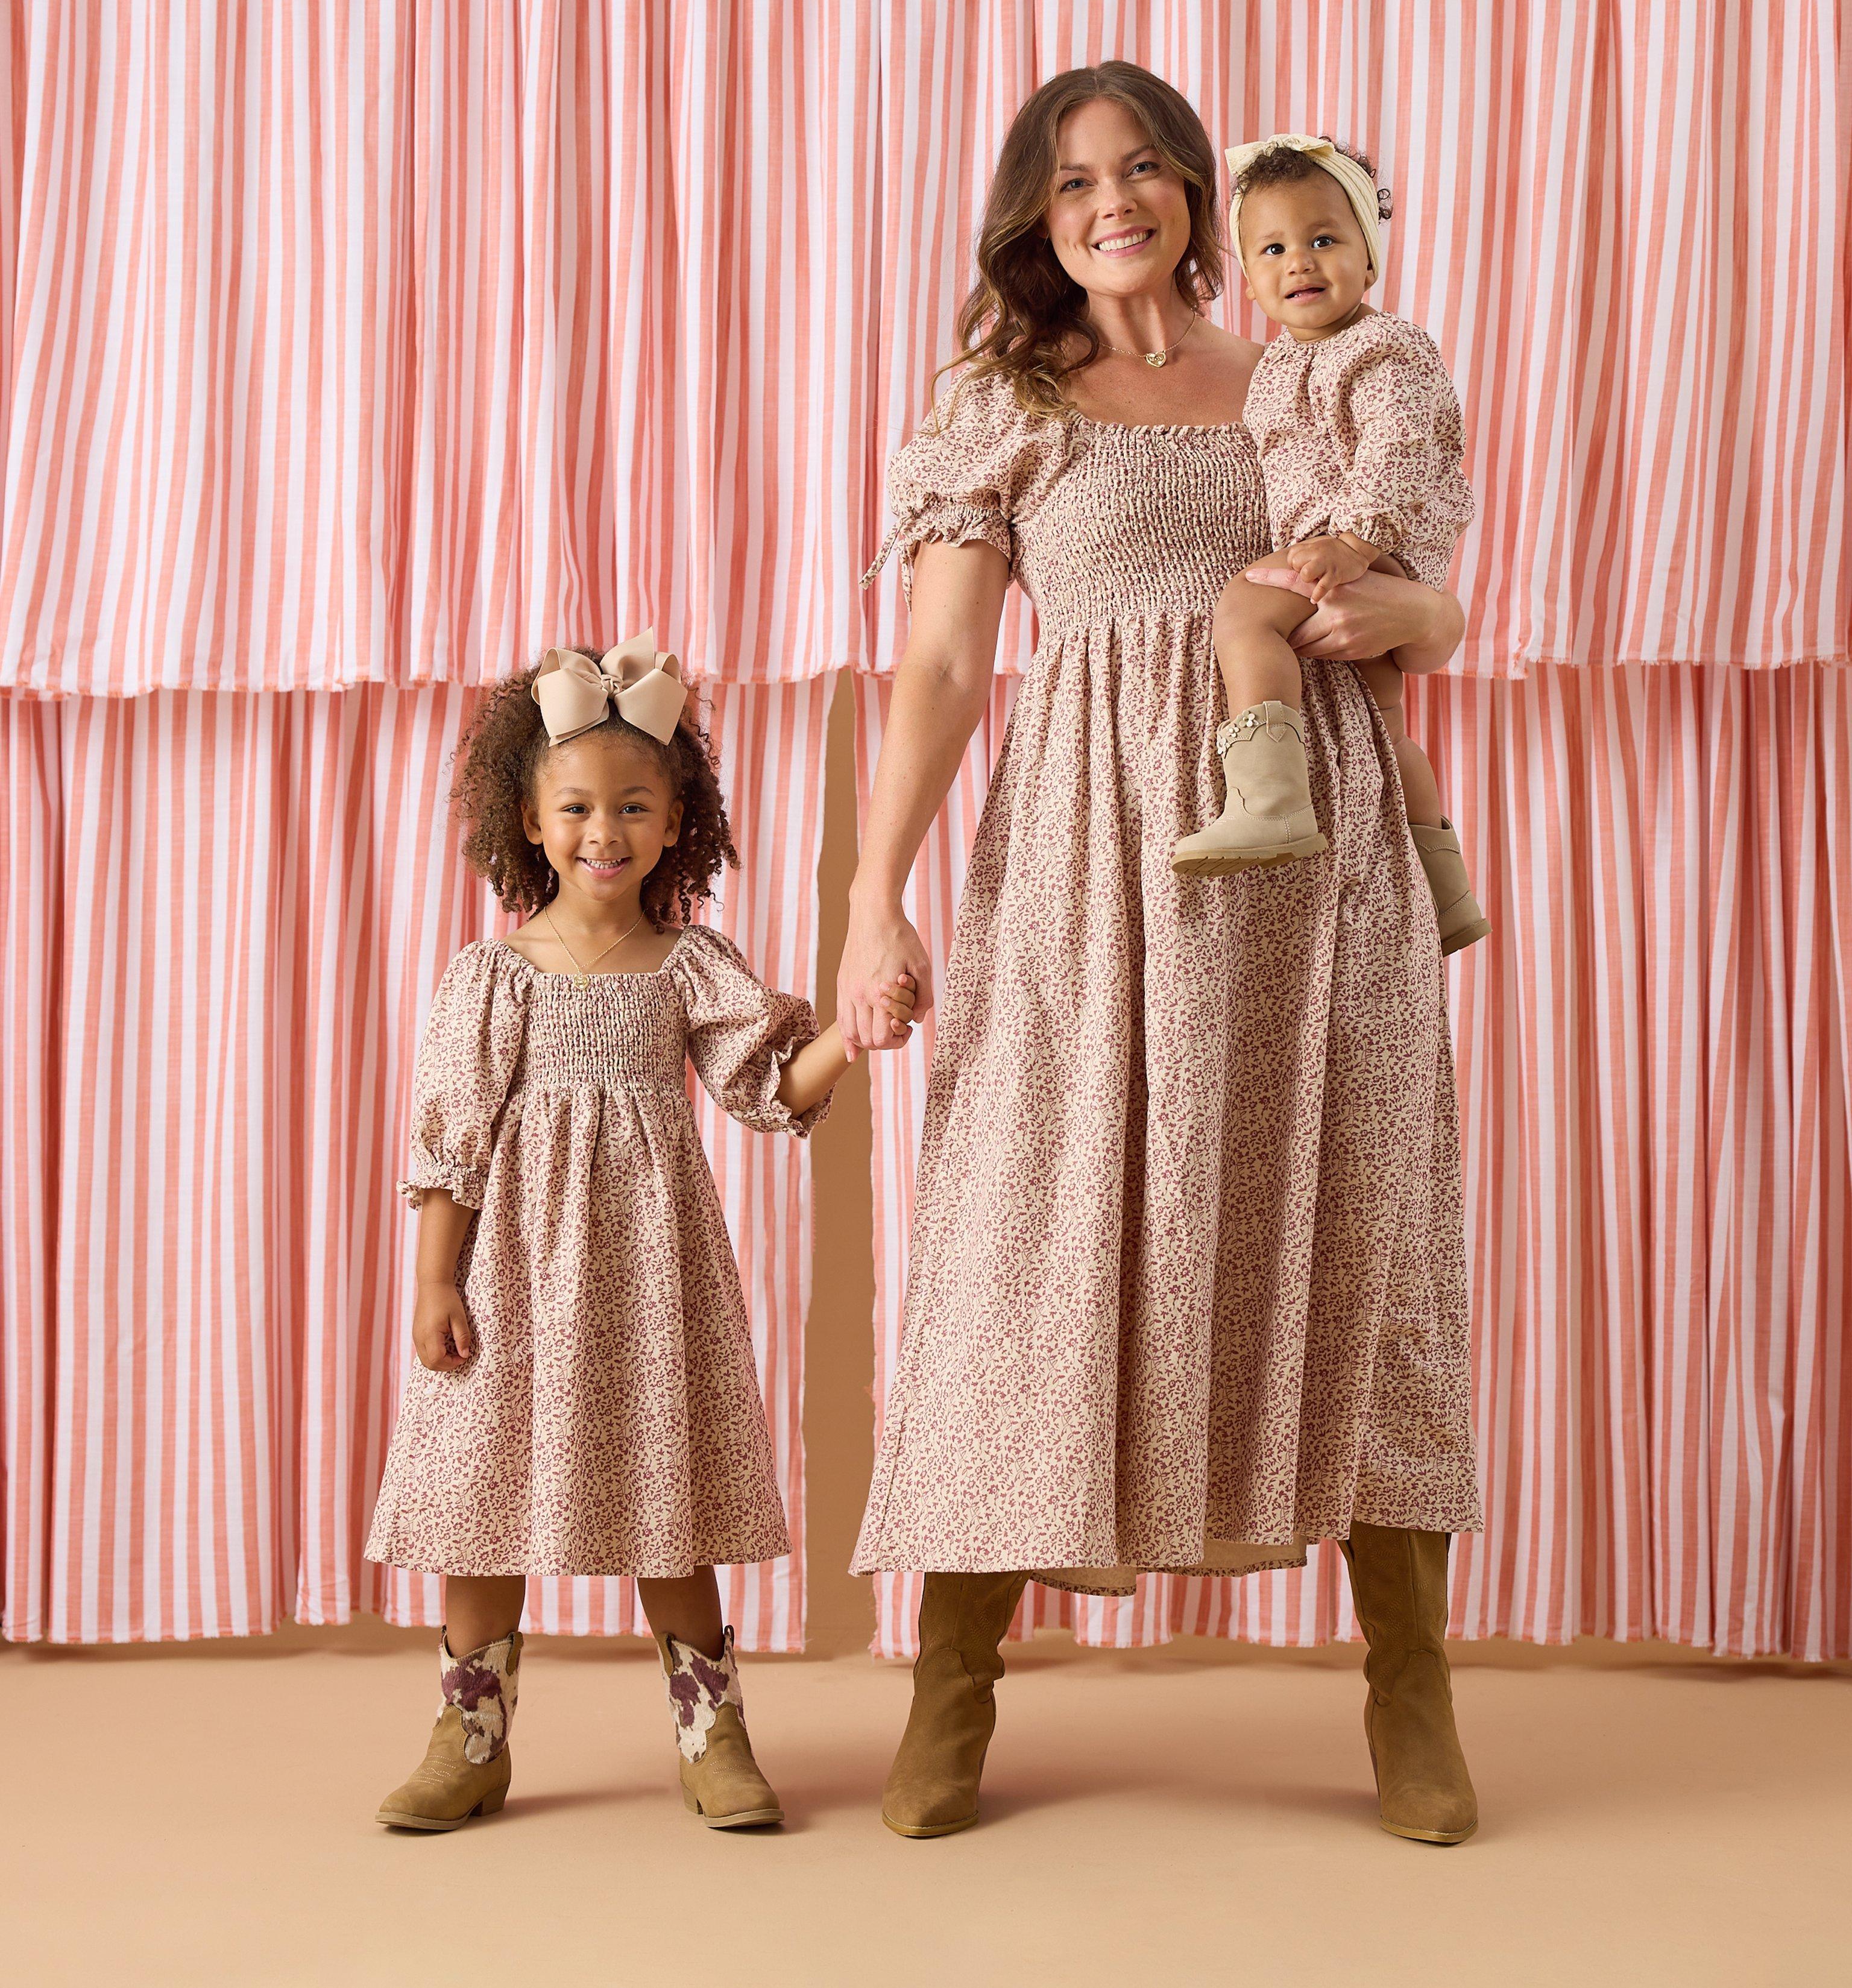 Mom, Toddler, and baby girl wearing matching brown dresses.